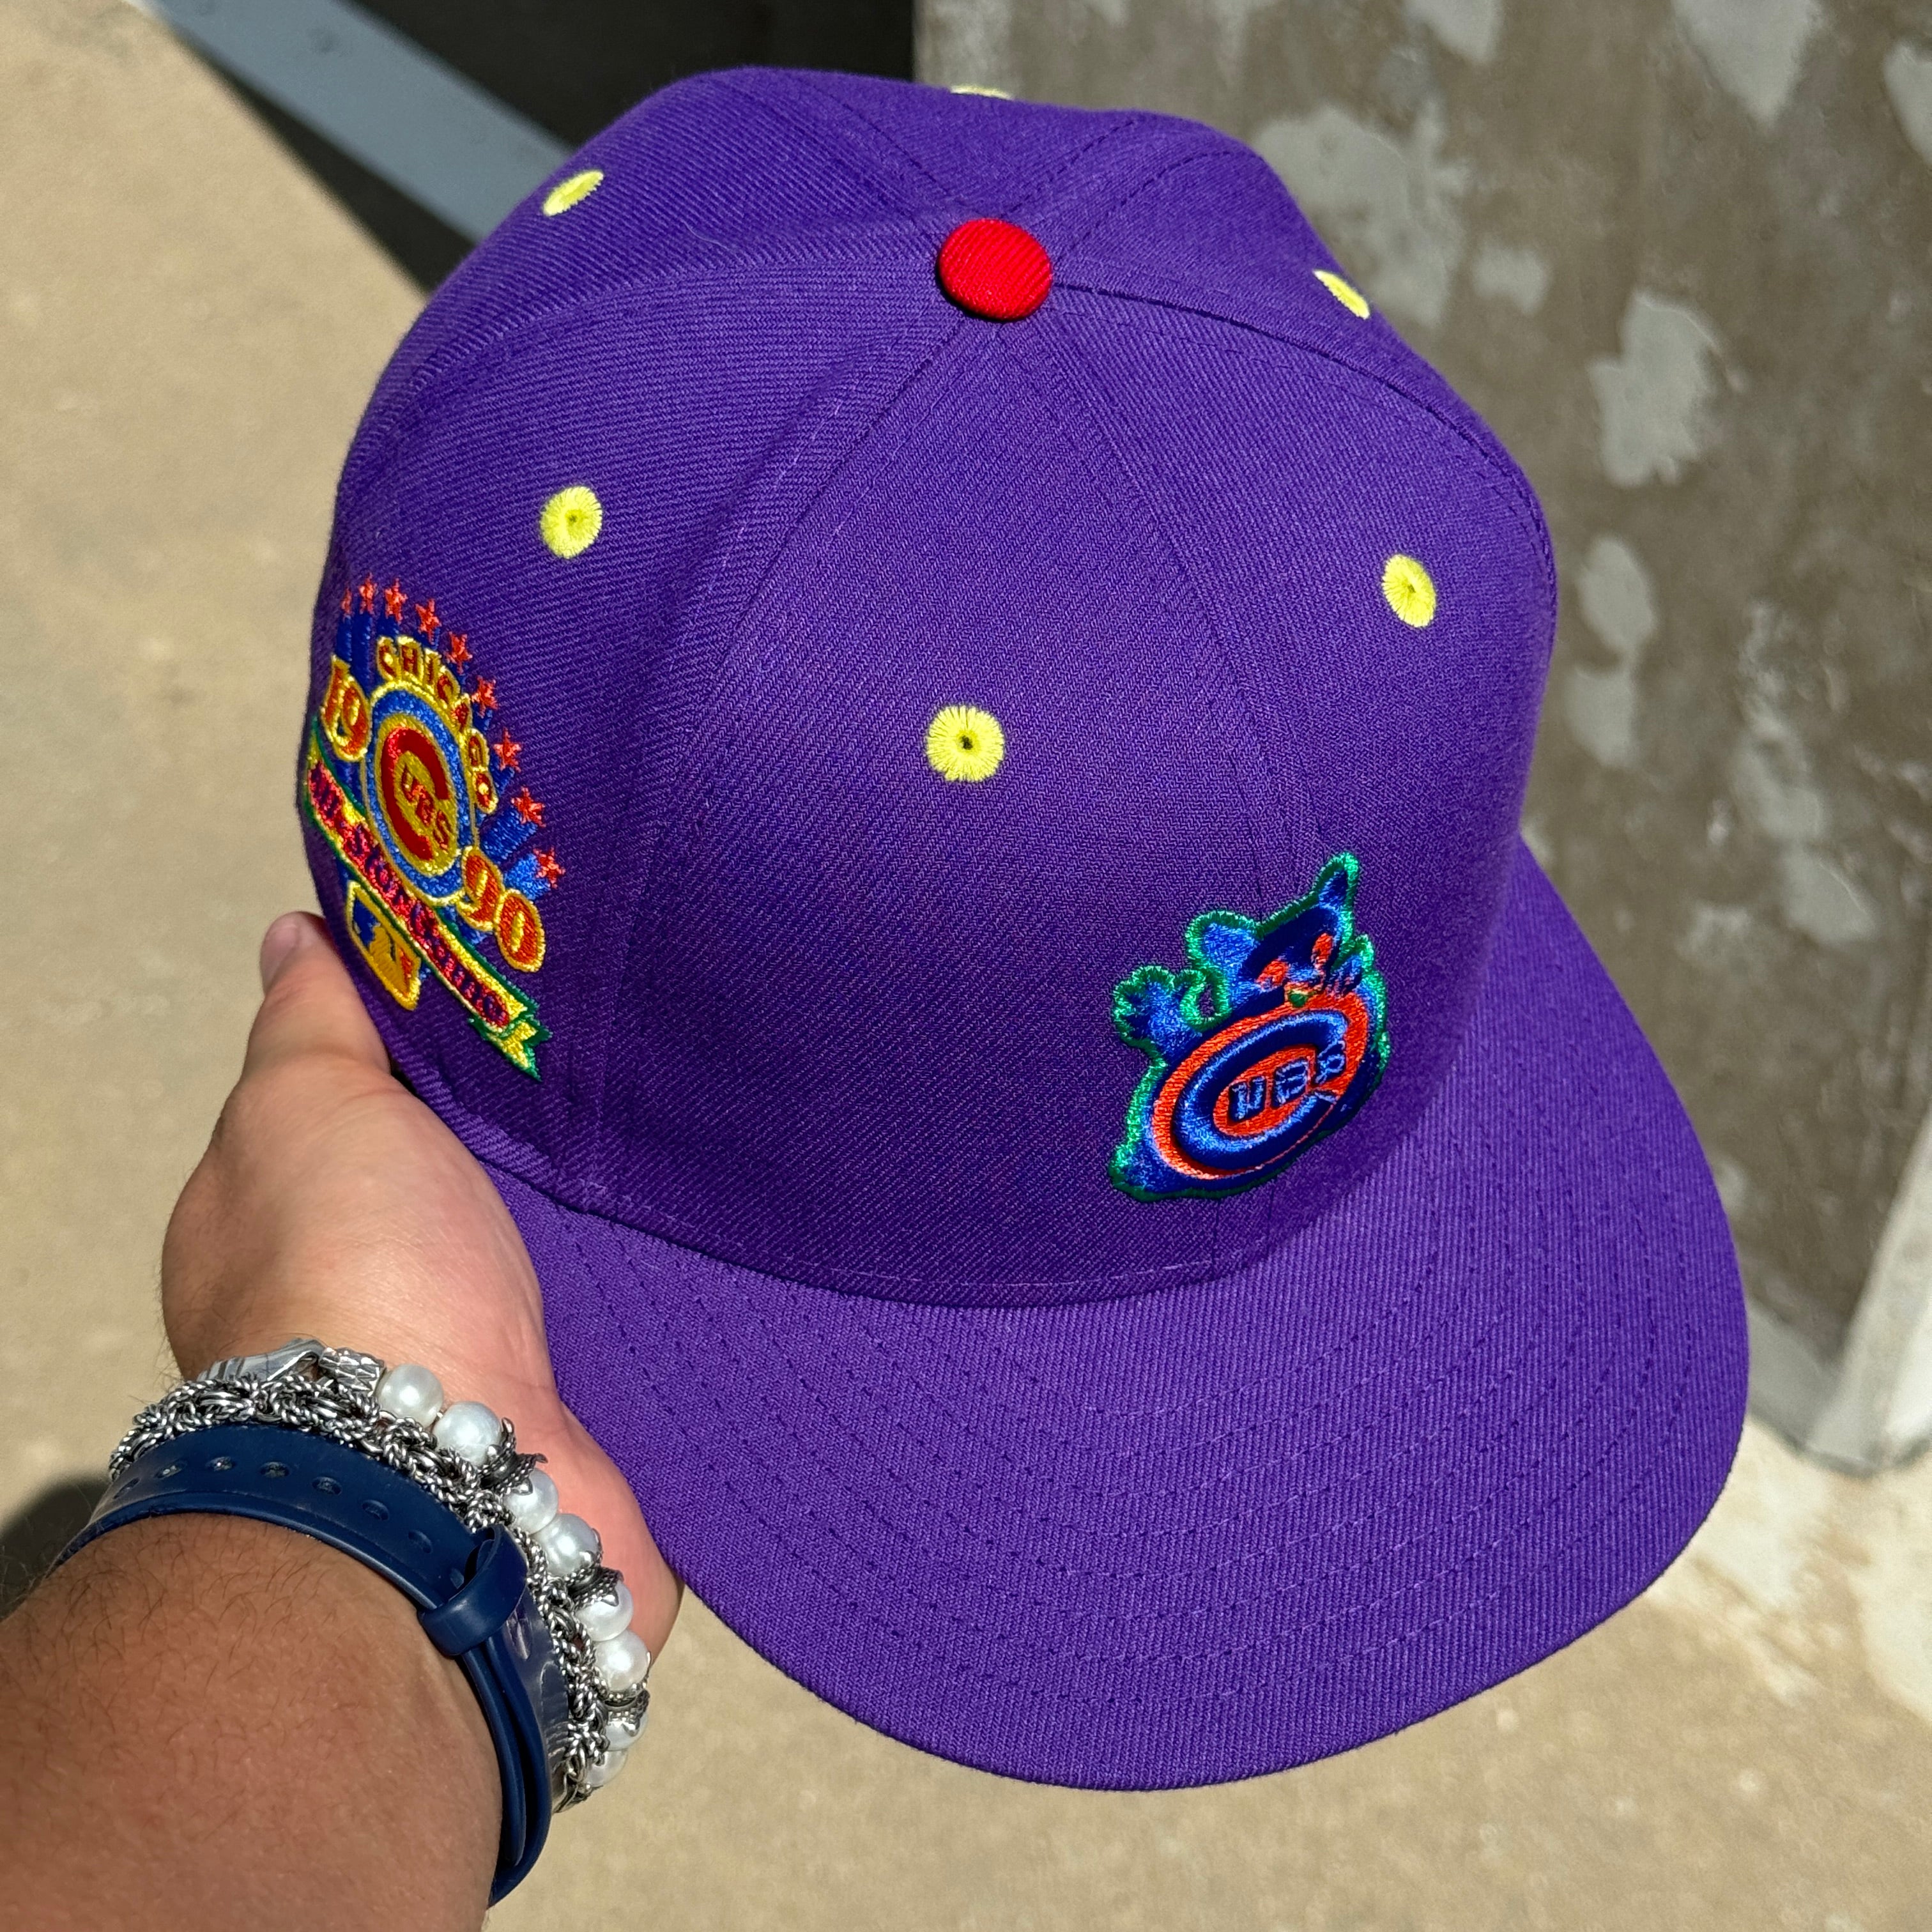 USED 1/8 Purple Chicago Cubs 1990 All Star Game 59fifty New Era Fitted Hat Cap